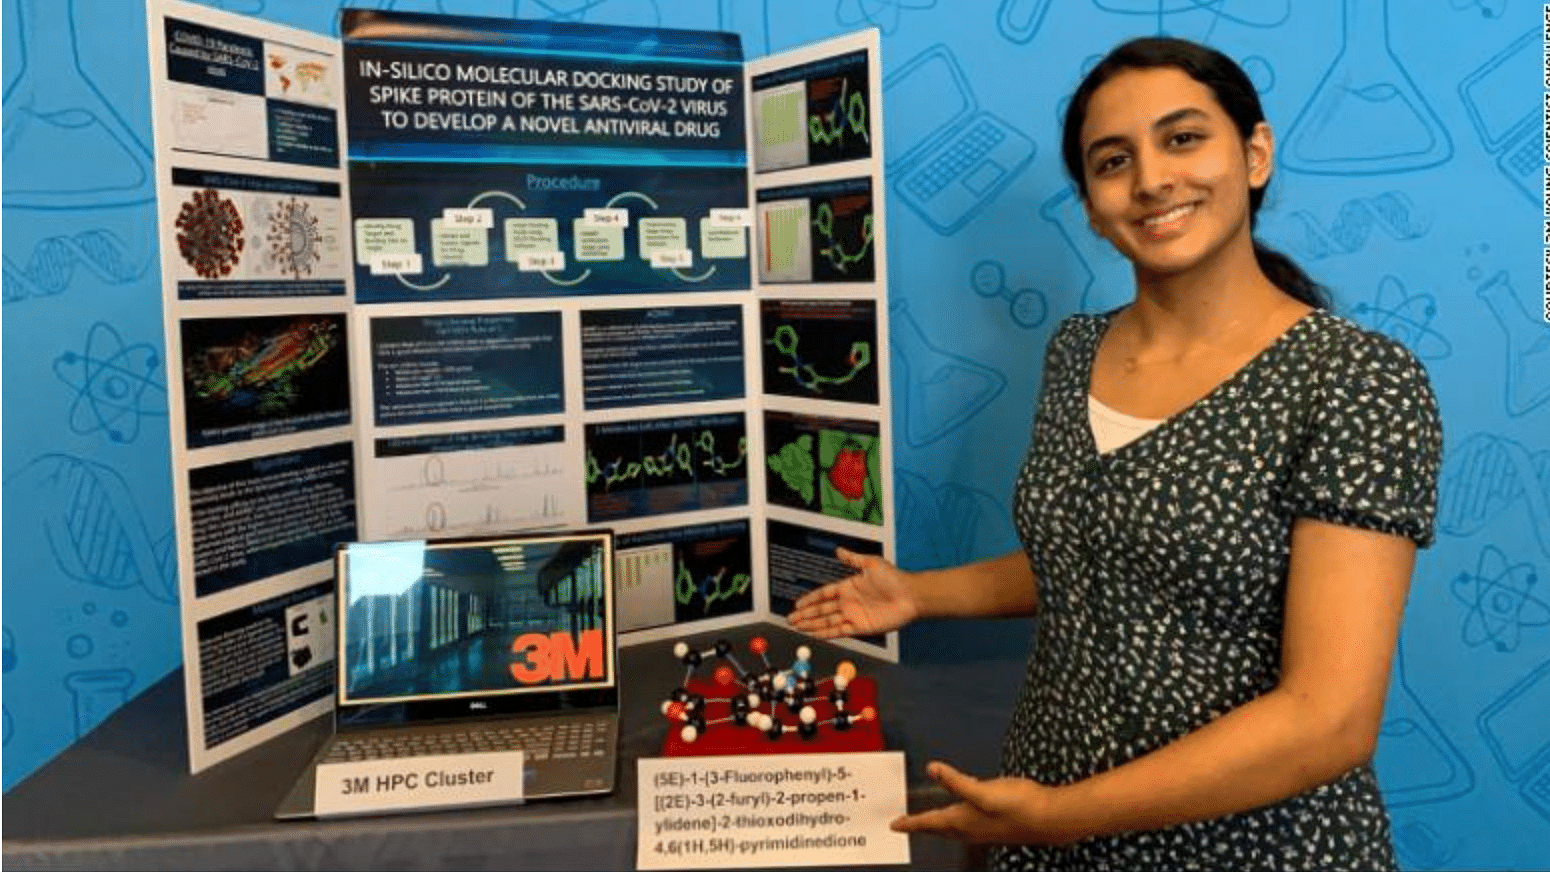 Anika Chebrolu, a 14-yr-old from Frisco, Texas has just won the 2020 3M Young Scientist Challenge for a discovery that could provide a potential therapy to Covid-19.